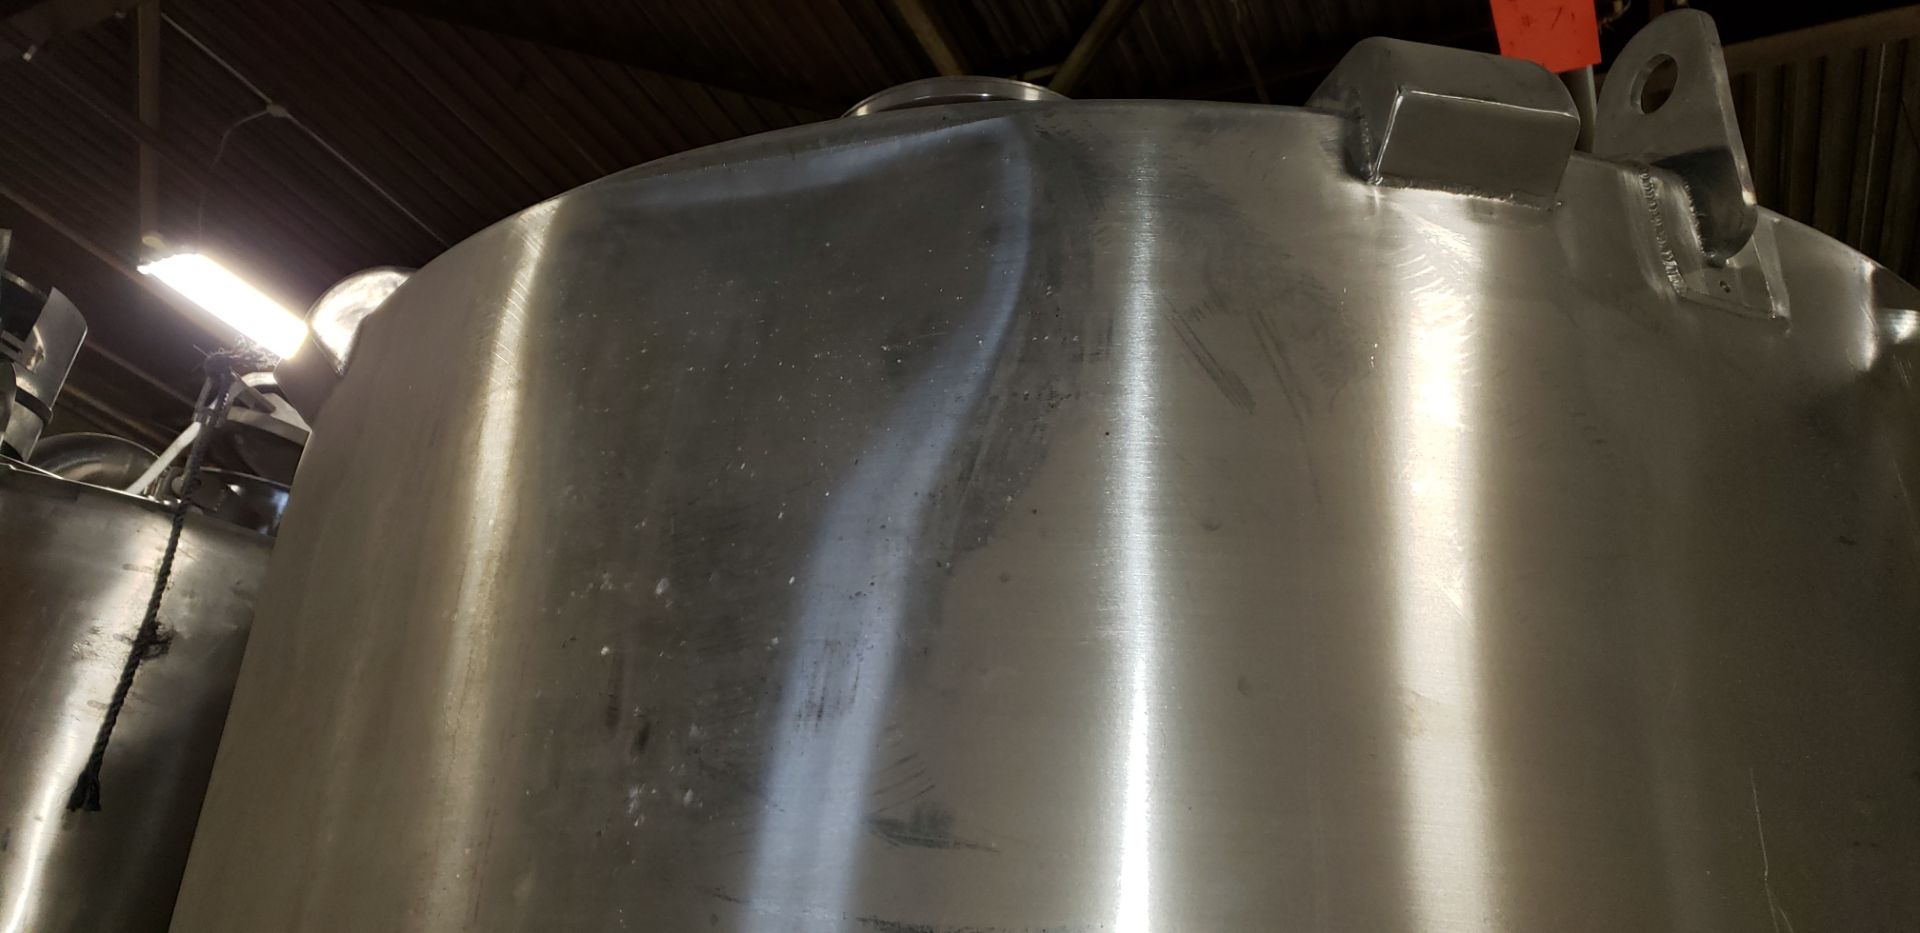 4270 L (1128 USG) Stainless Steel Tank Closed Top w/Manhole **See Auctioneers Note** - Image 14 of 15